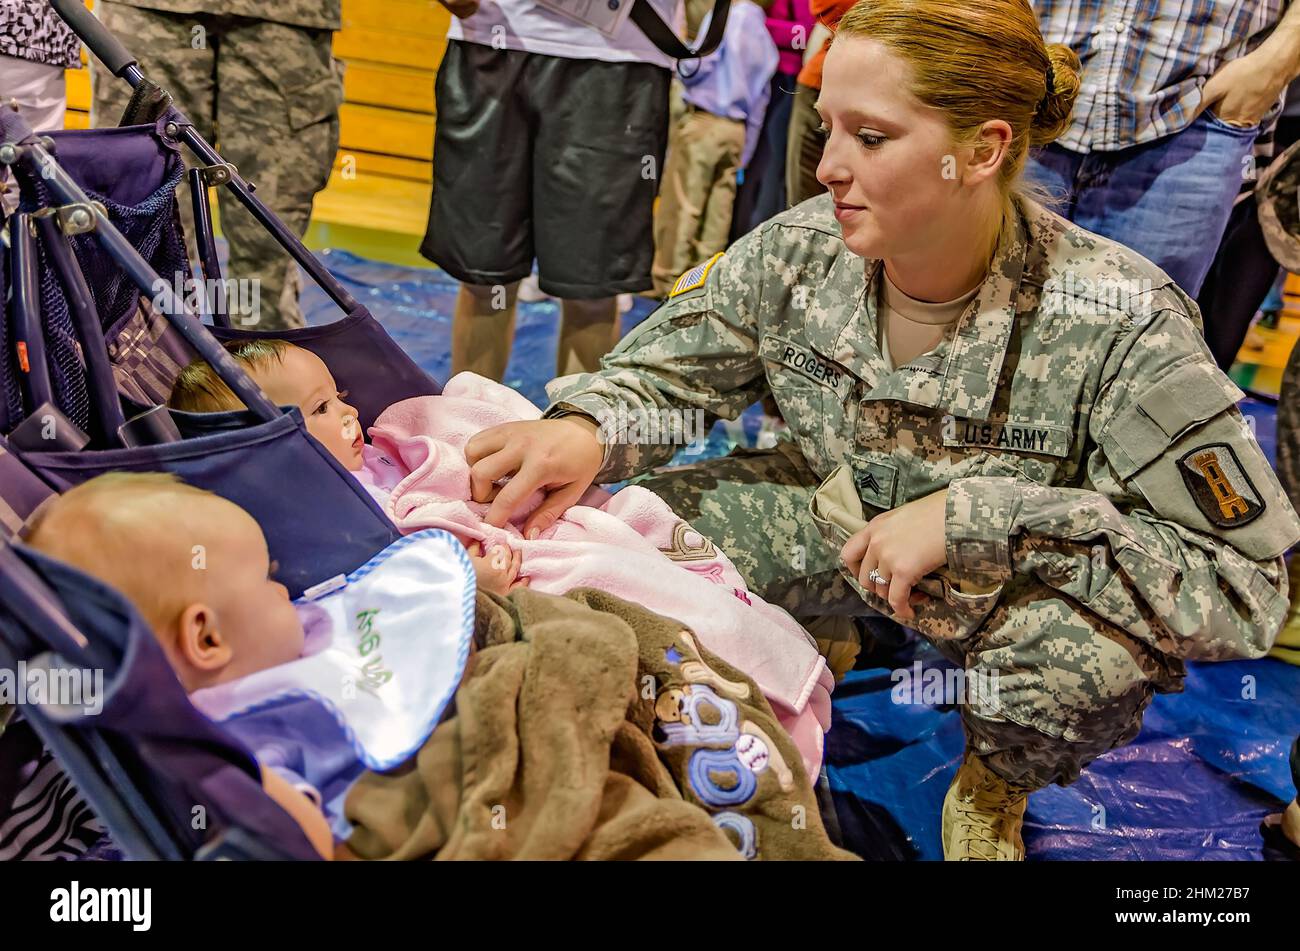 Sgt. Jenny Rogers, of the U.S. Army National Guard 223rd Engineer Battalion in West Point, says goodbye to a friend's twins during deployment. Stock Photo